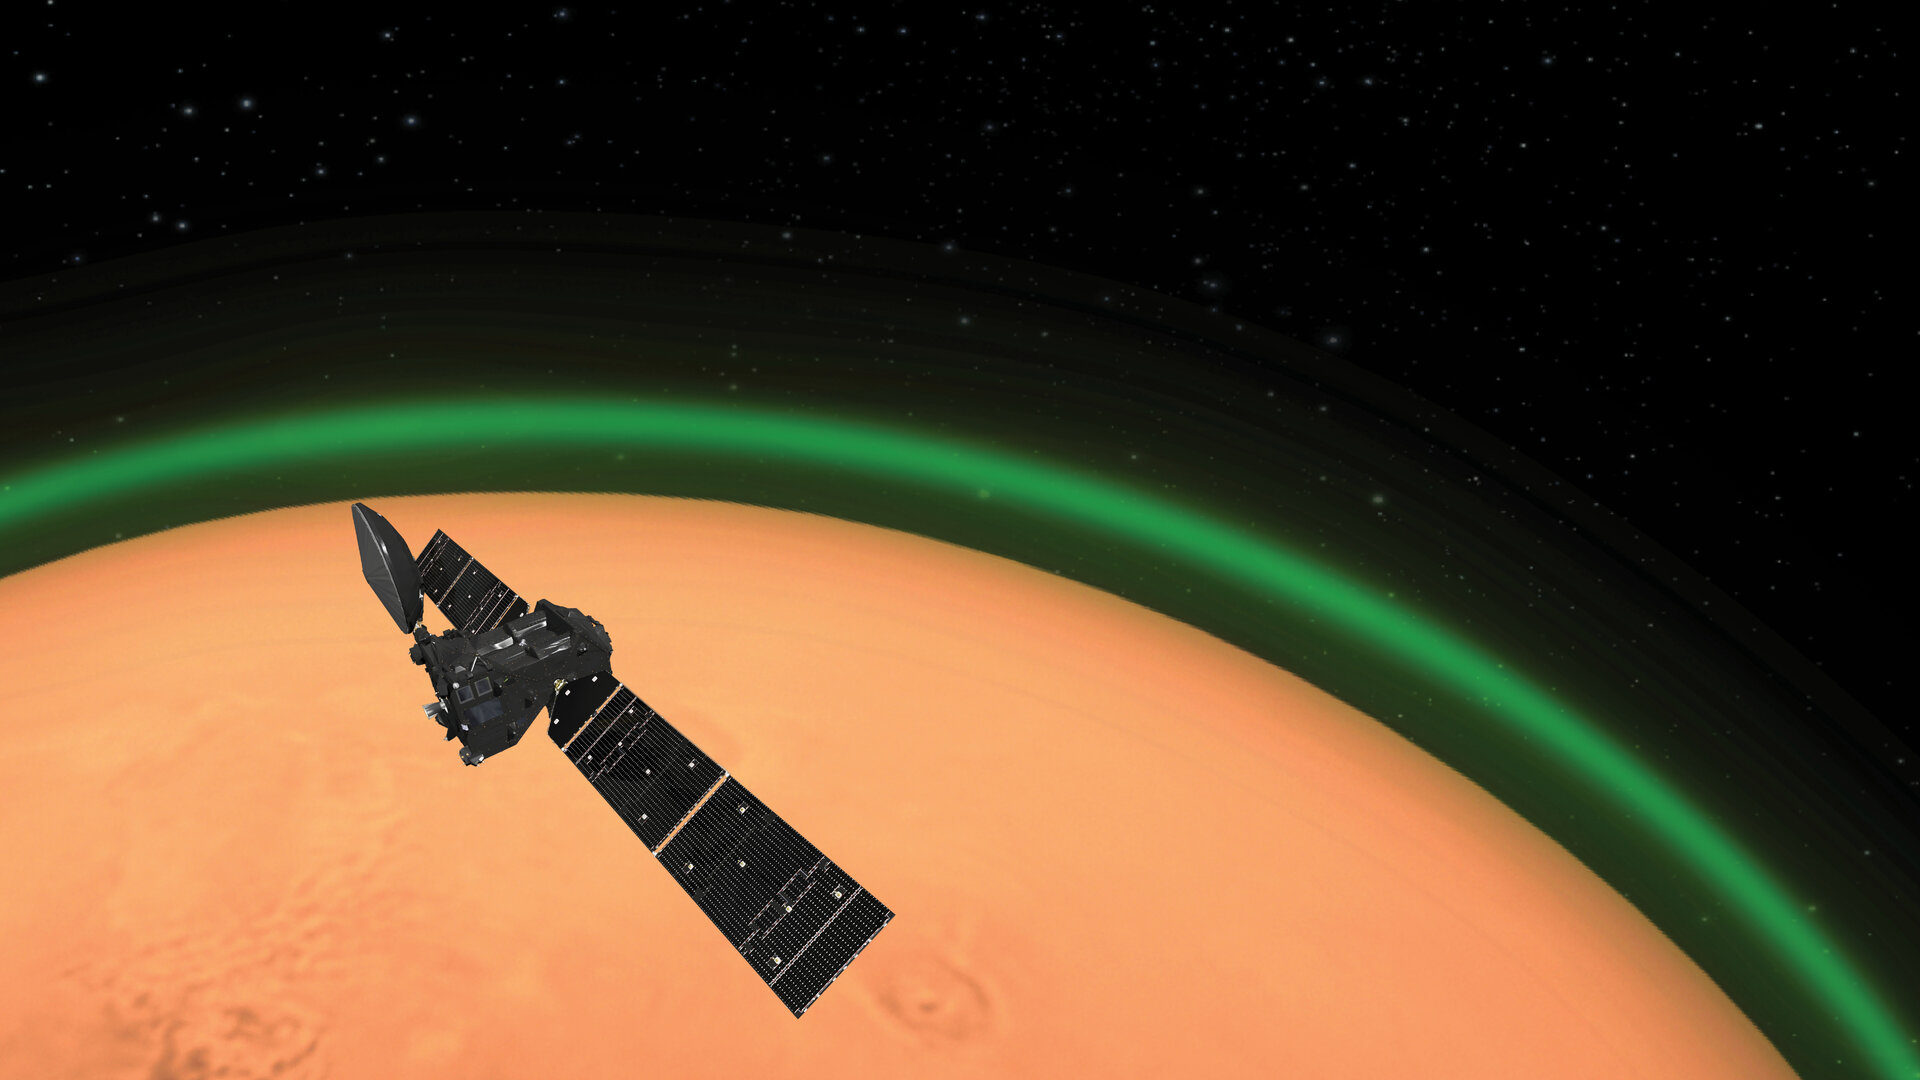 Mars probe sees green glow on Red Planet